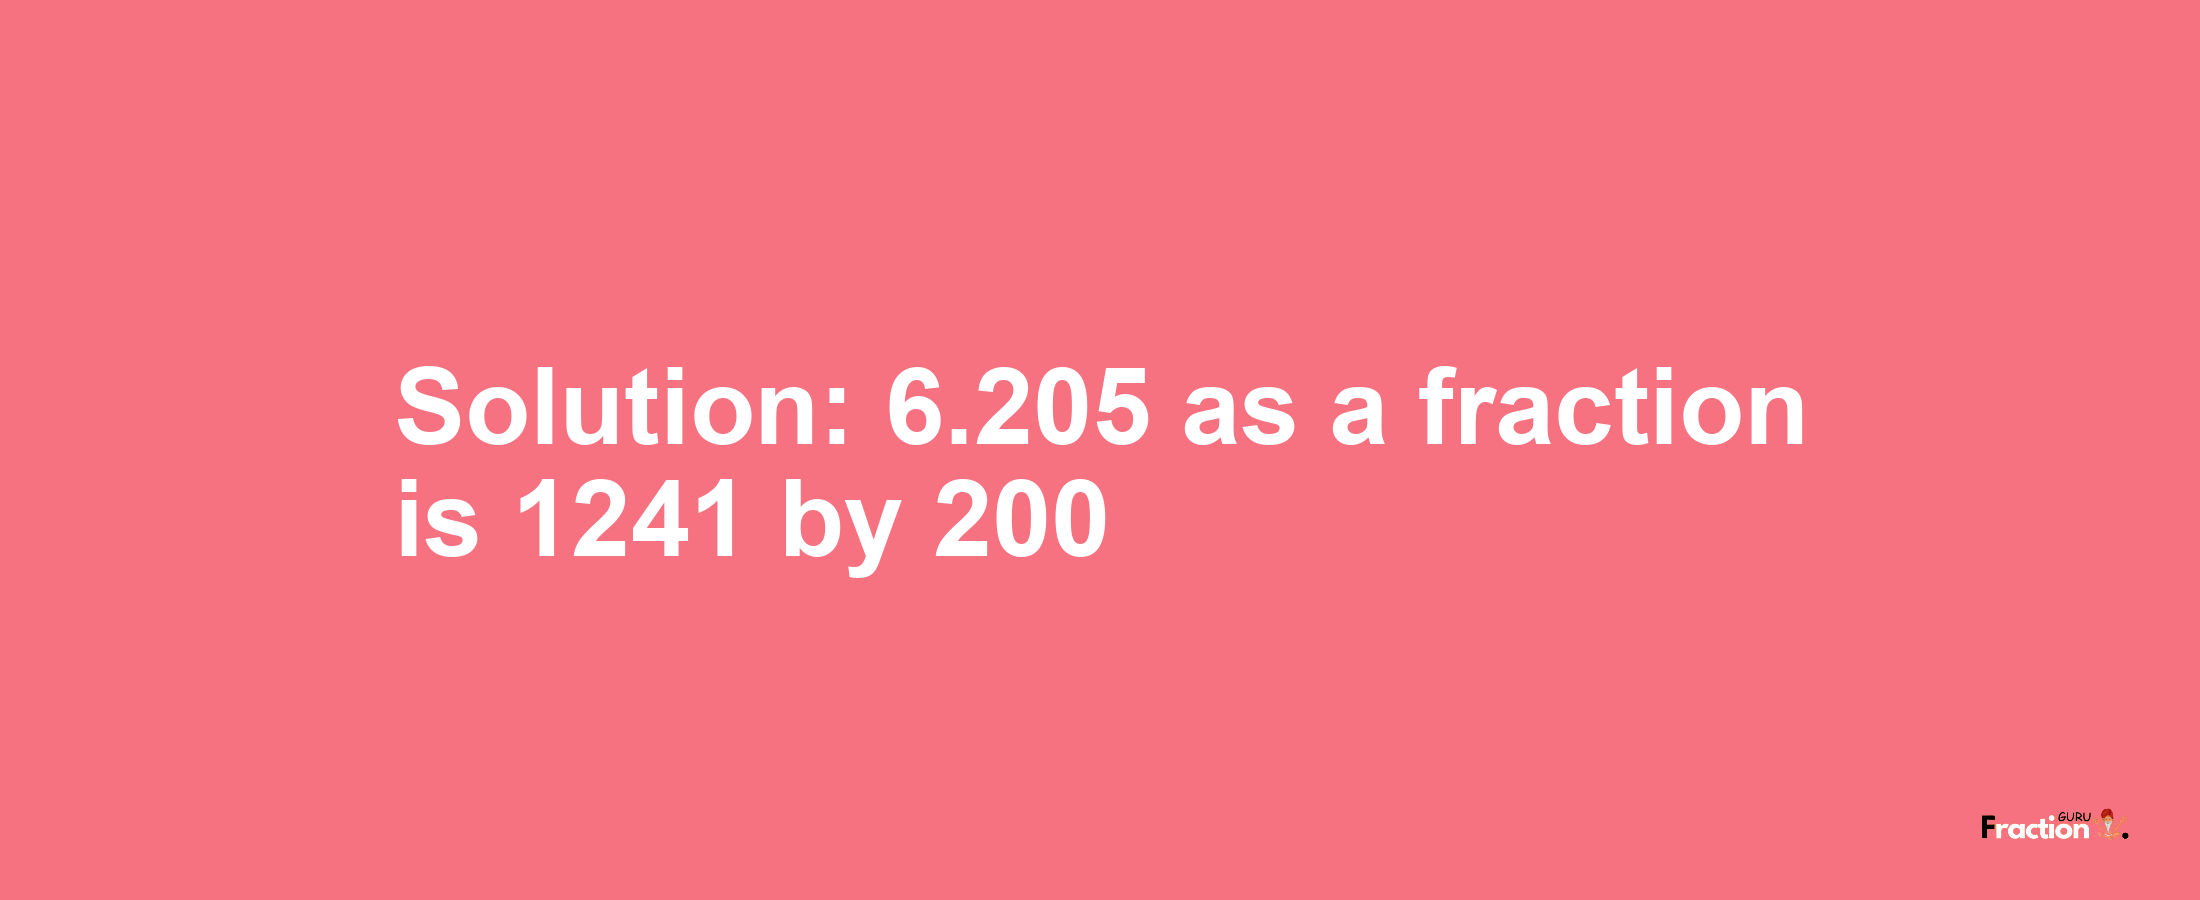 Solution:6.205 as a fraction is 1241/200